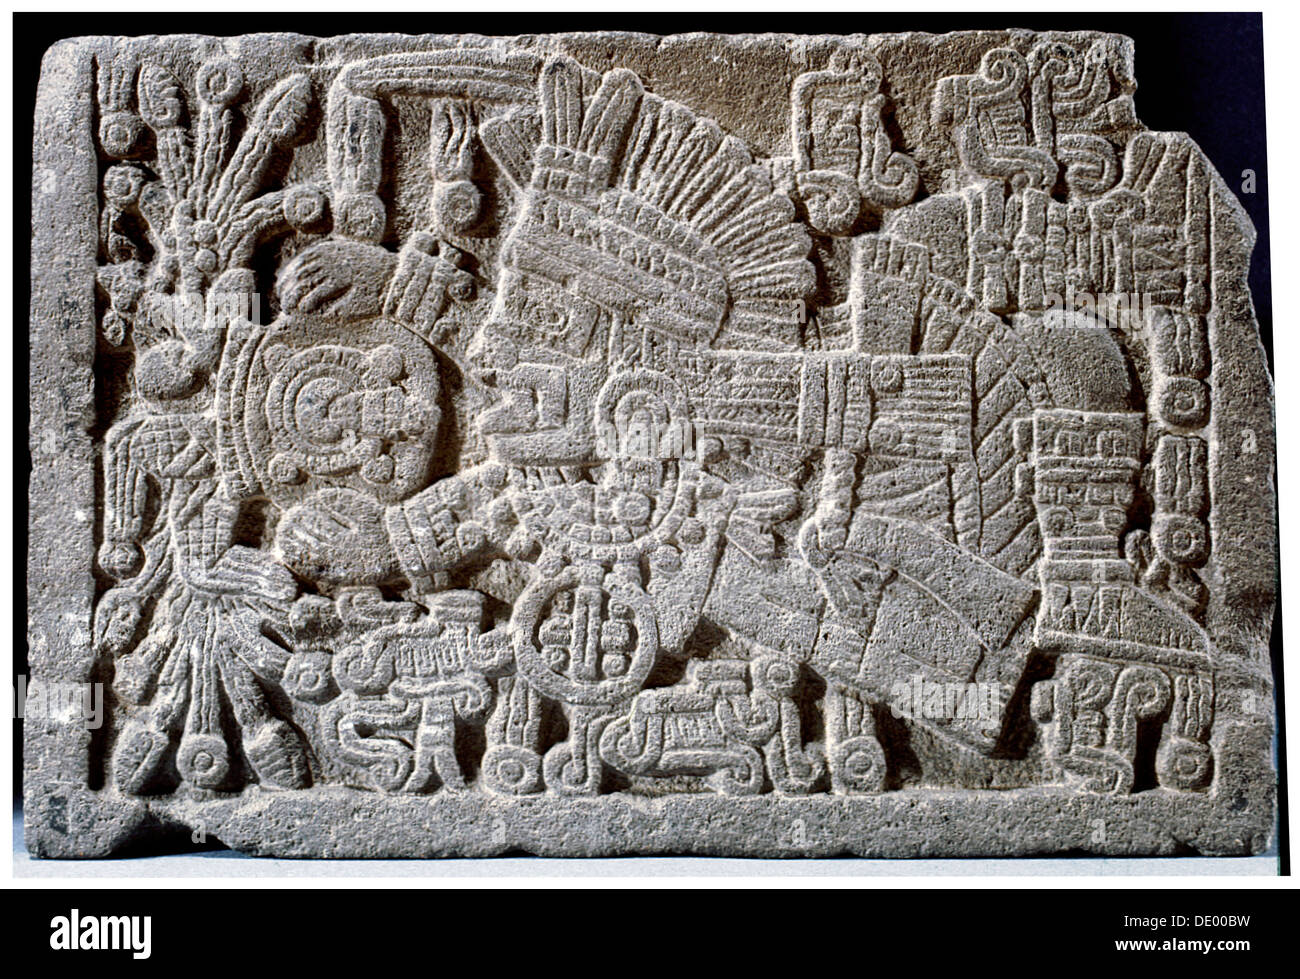 Base of a stone box, Aztec, Mexico, c1502. Artist: Werner Forman Stock Photo